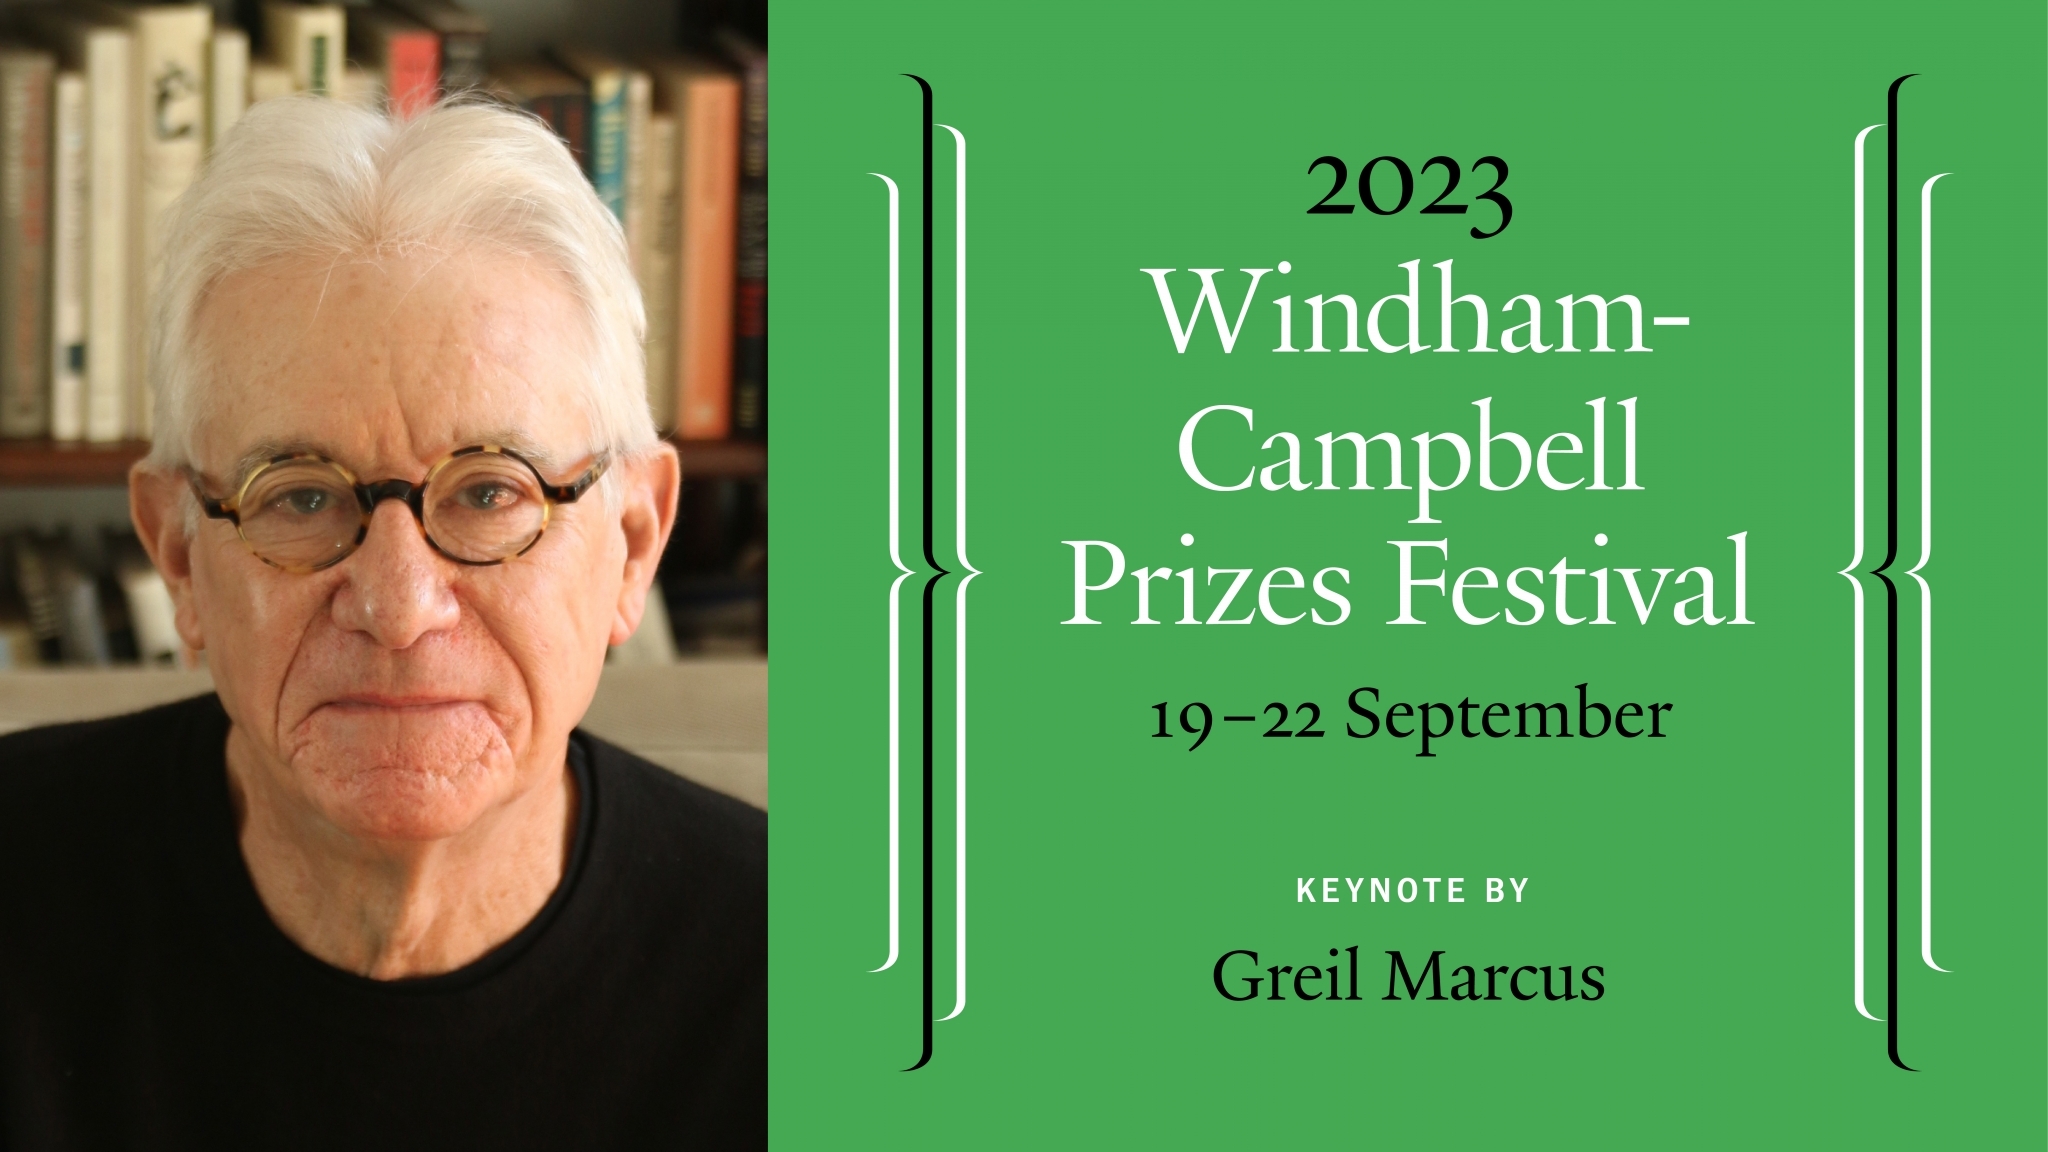 Prize Ceremony and Windham-Campbell Lecture by Greil Marcus